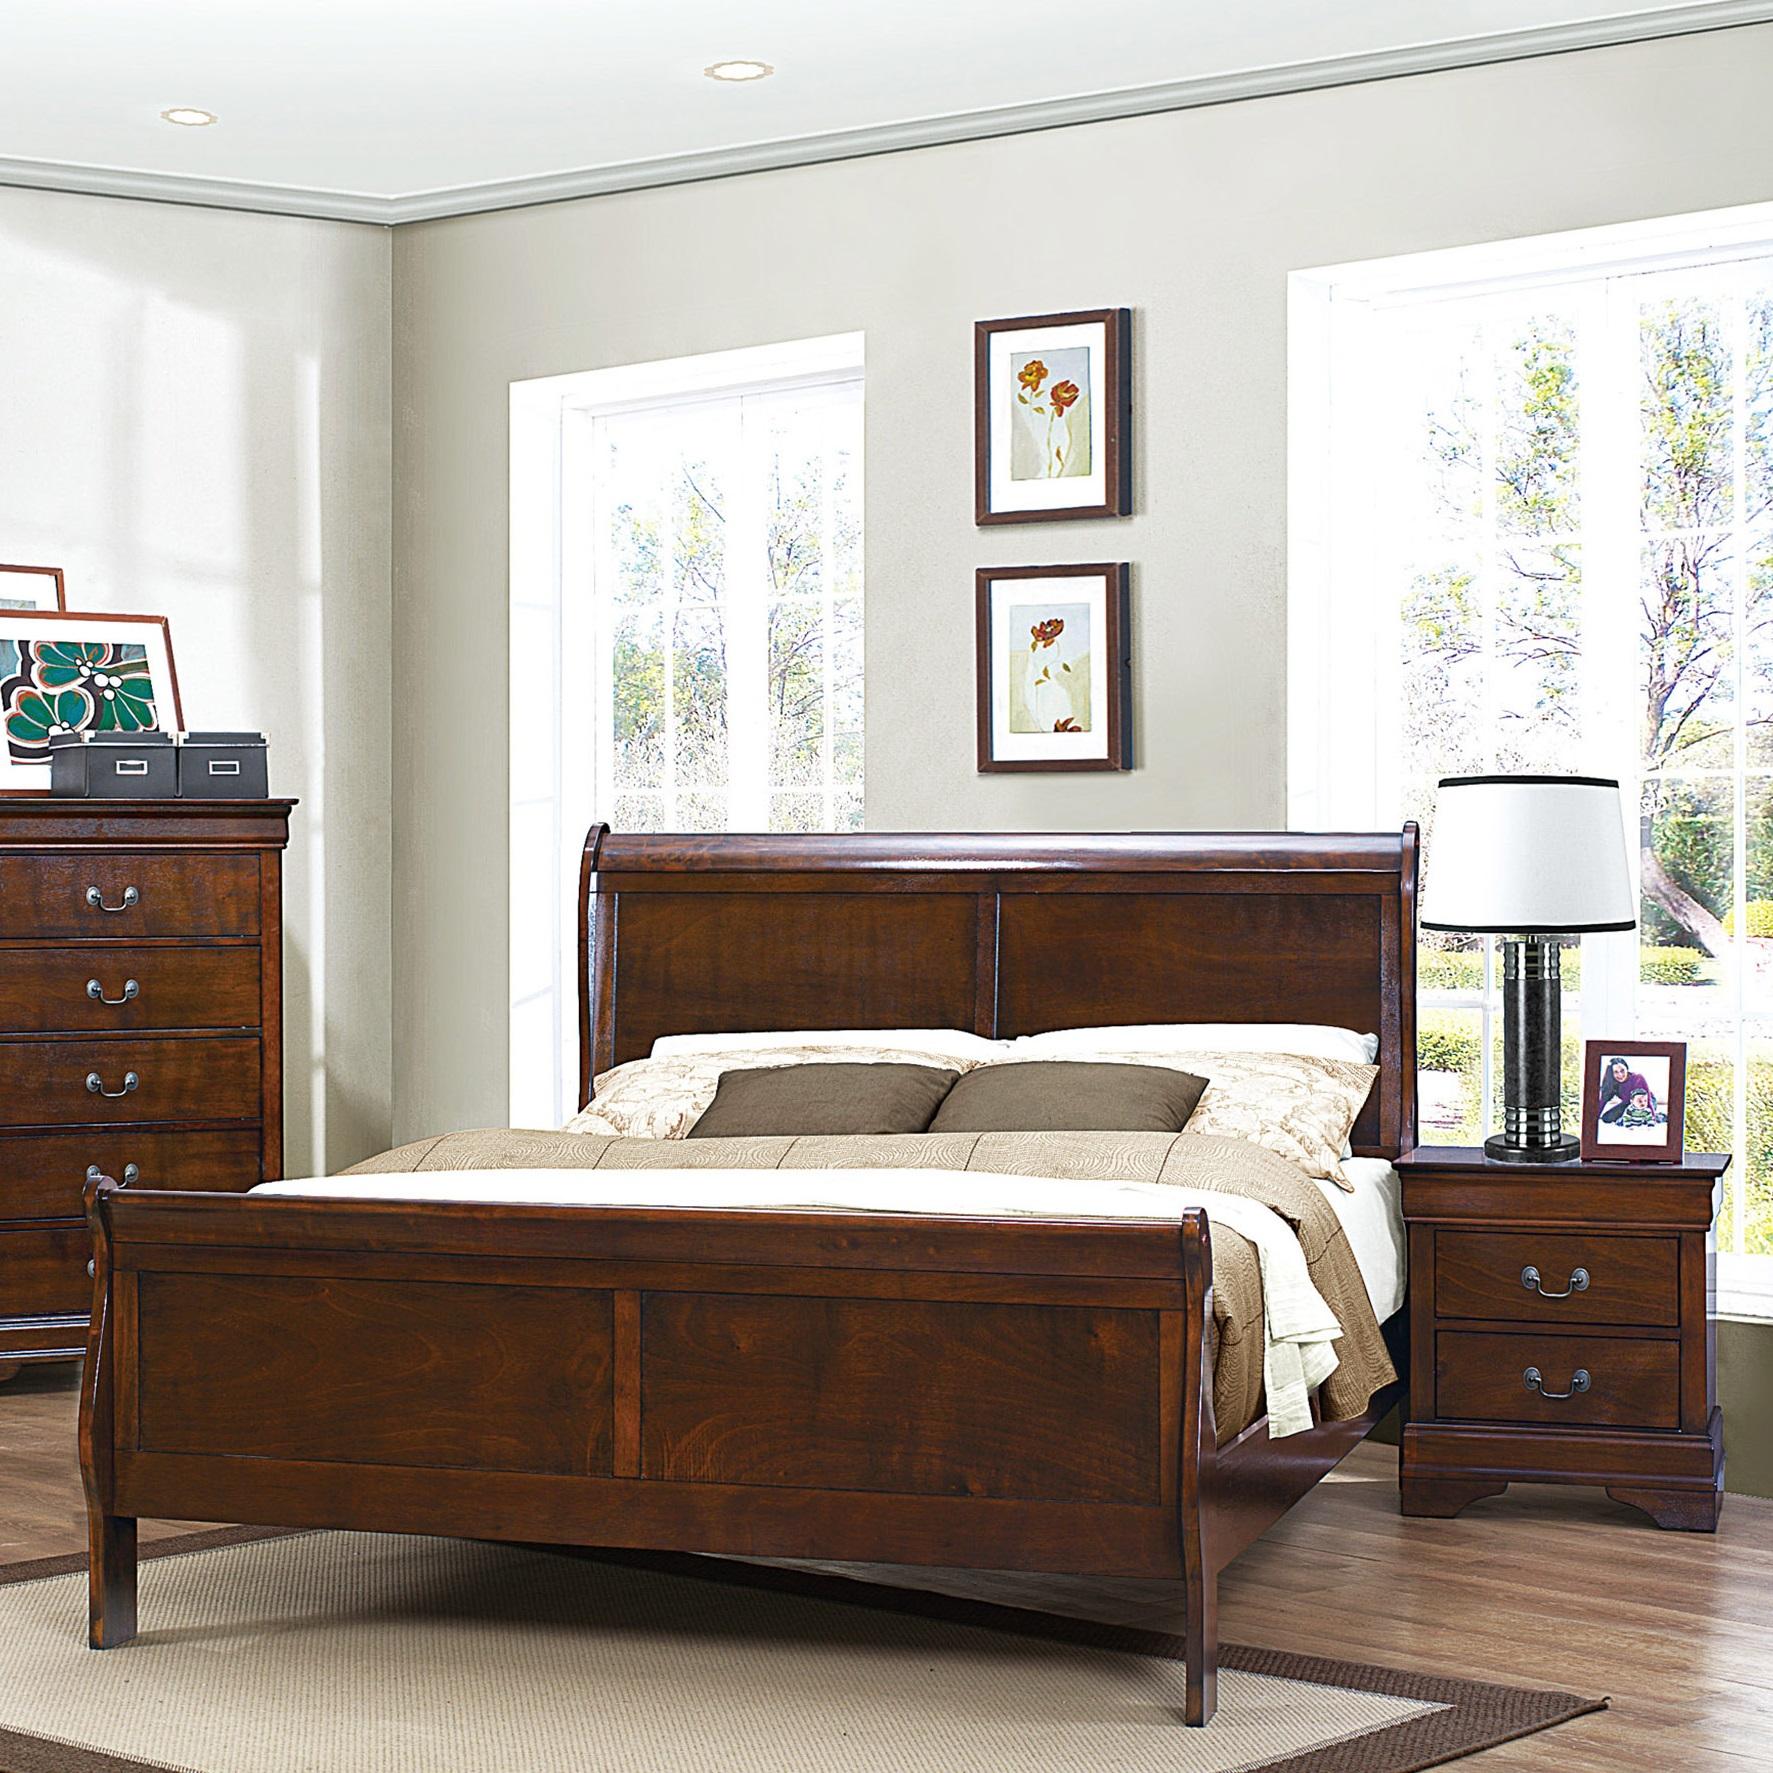 Traditional Bedroom Set 2147-1-3PC Mayville 2147-1-3PC in Cherry 